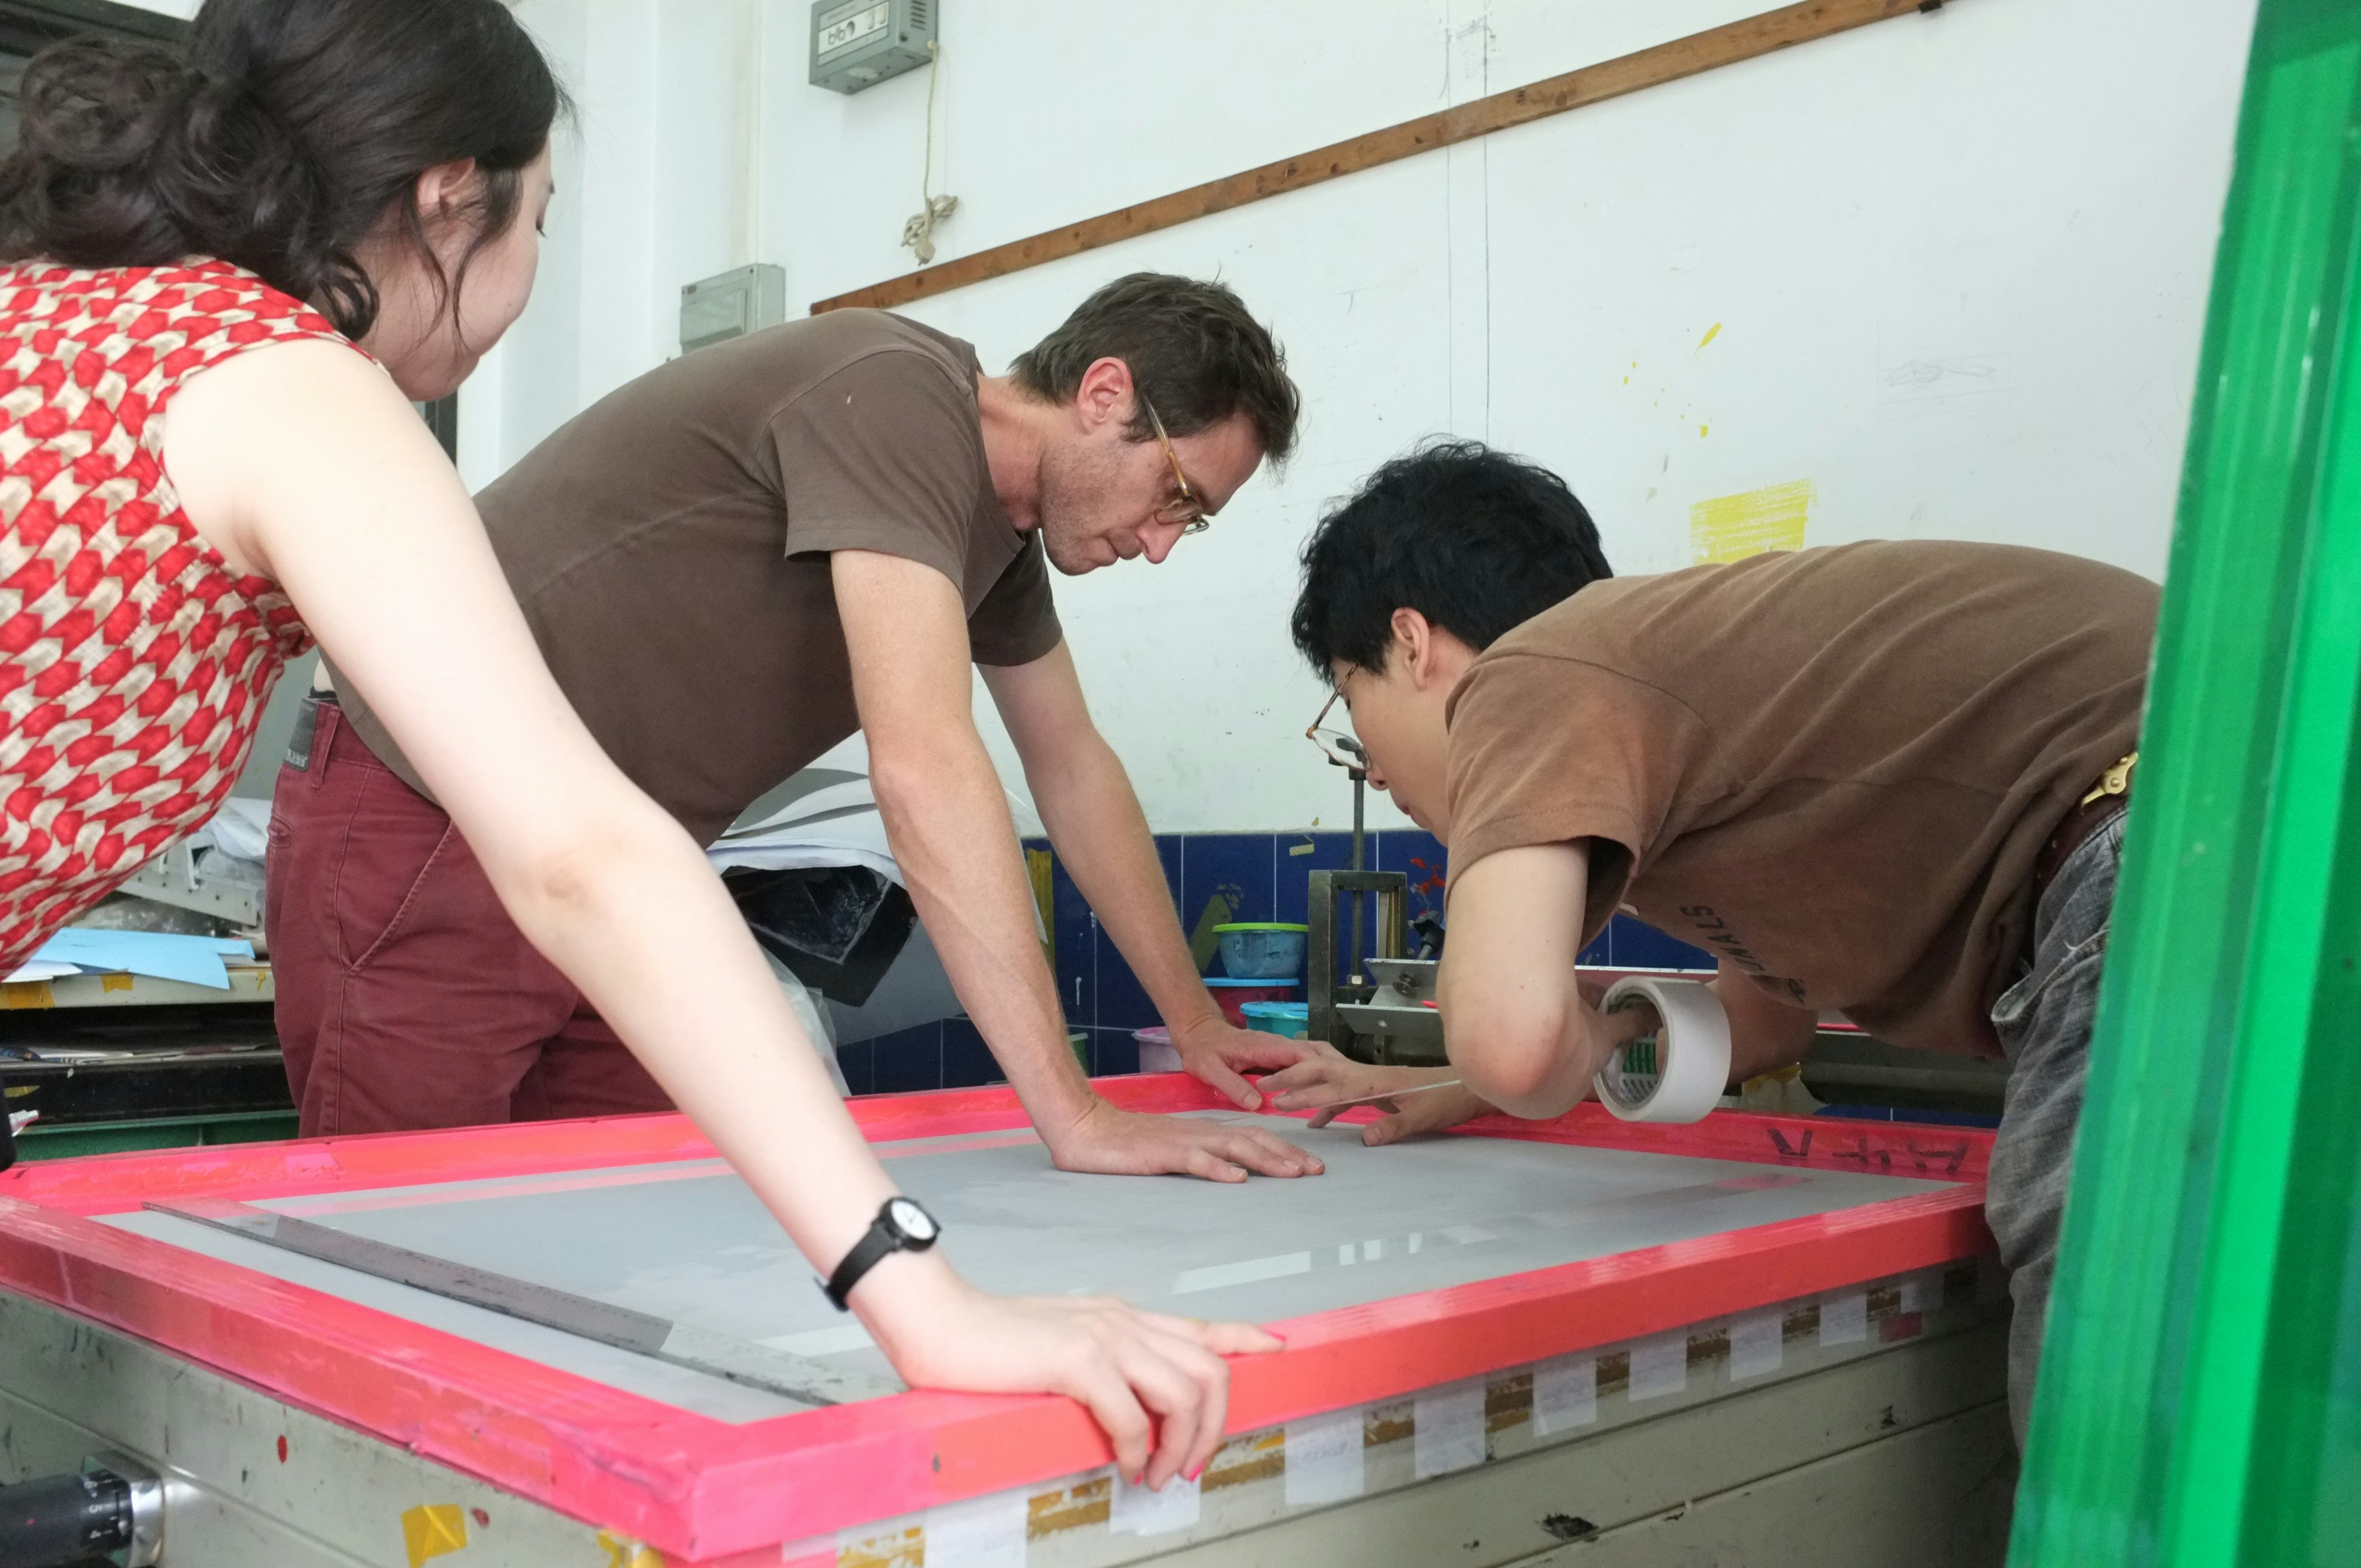 A female-presenting figure and two male-presenting figures leaning over a screen printer.